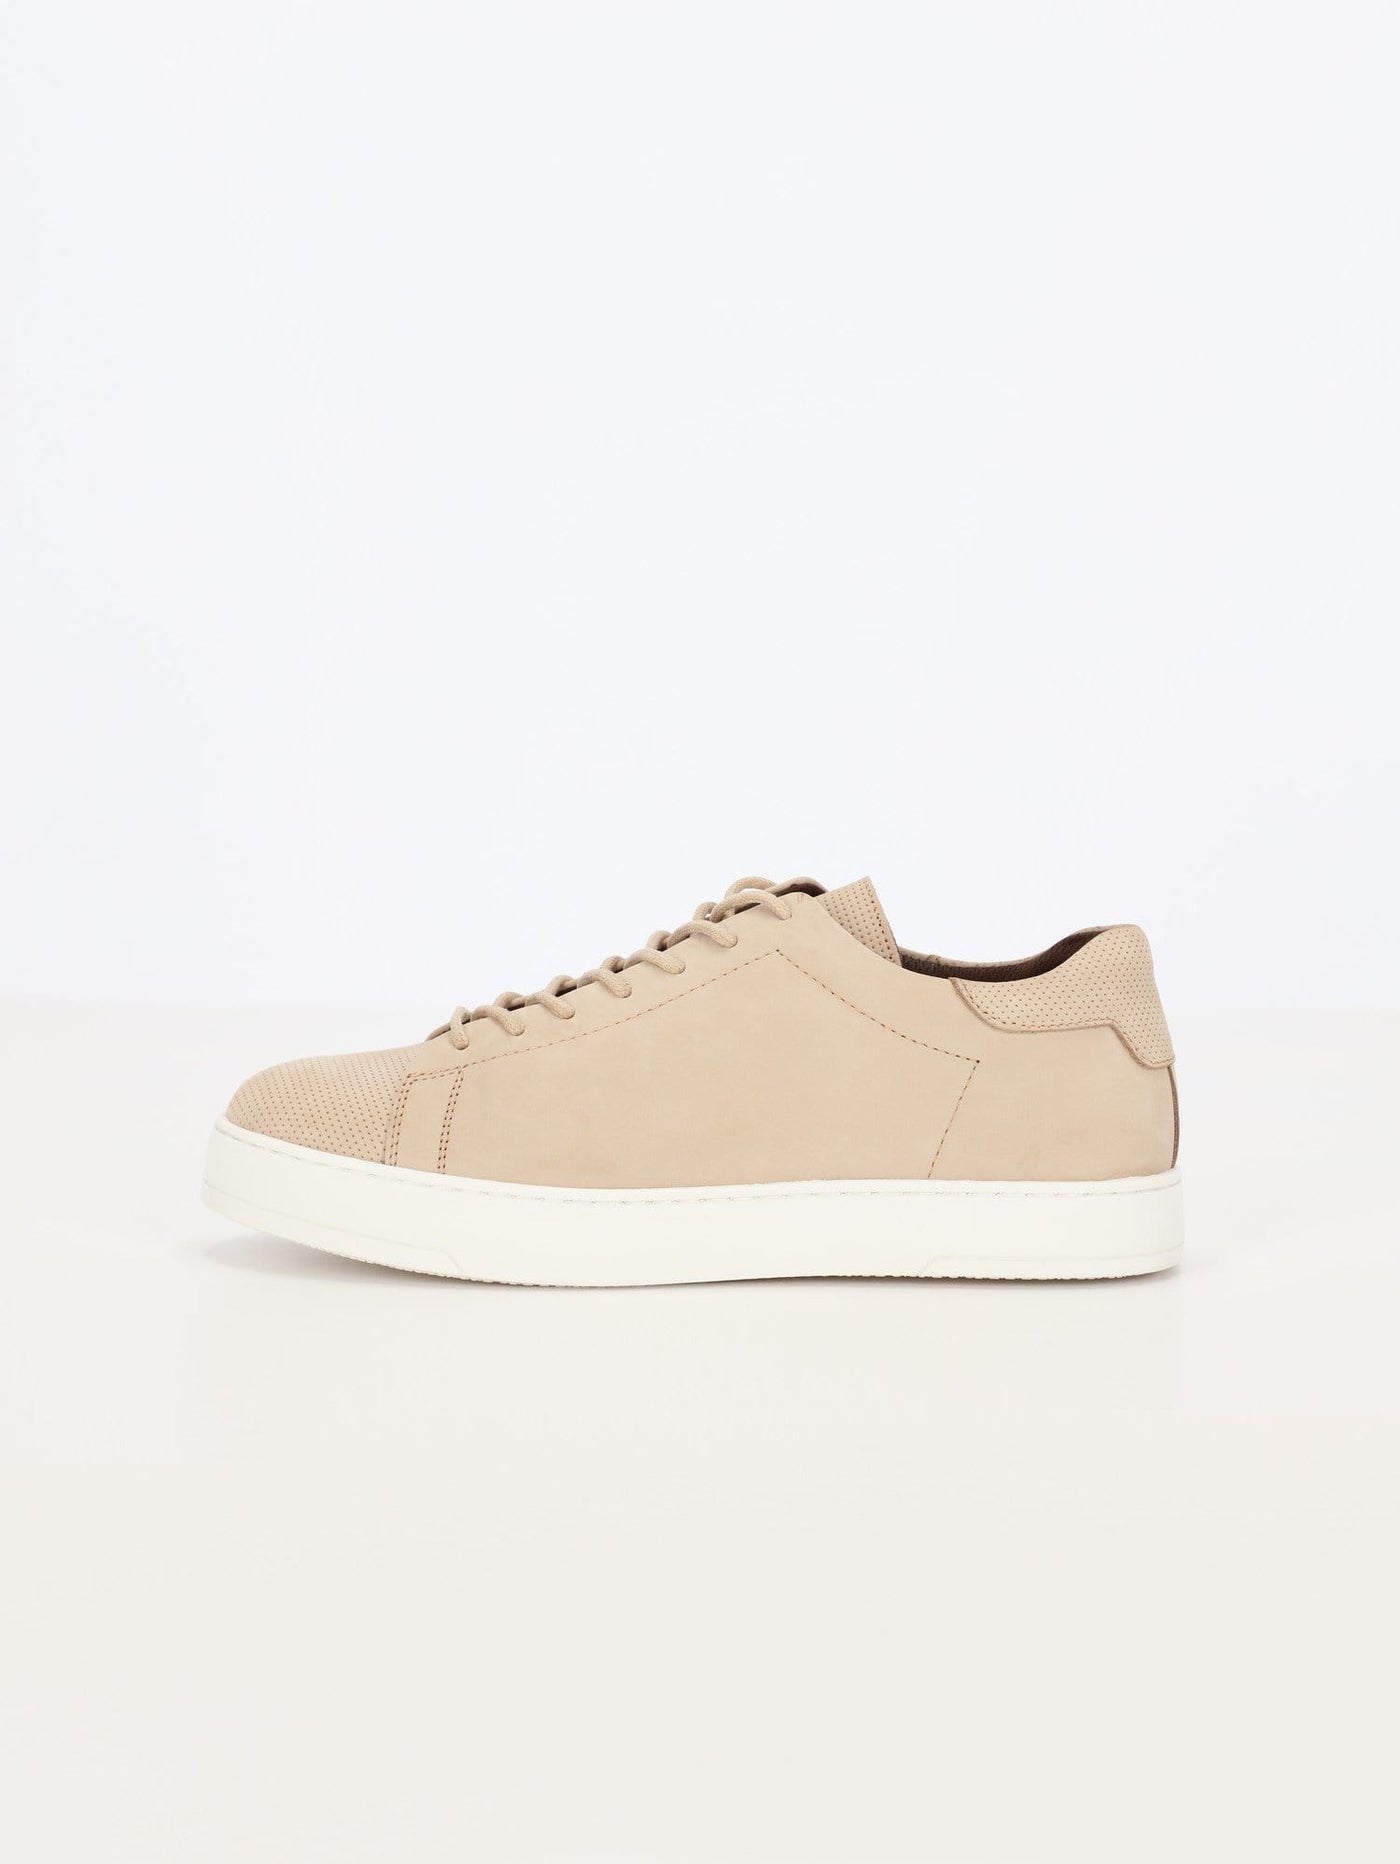 OR Shoes Lace Up Casual Shoes